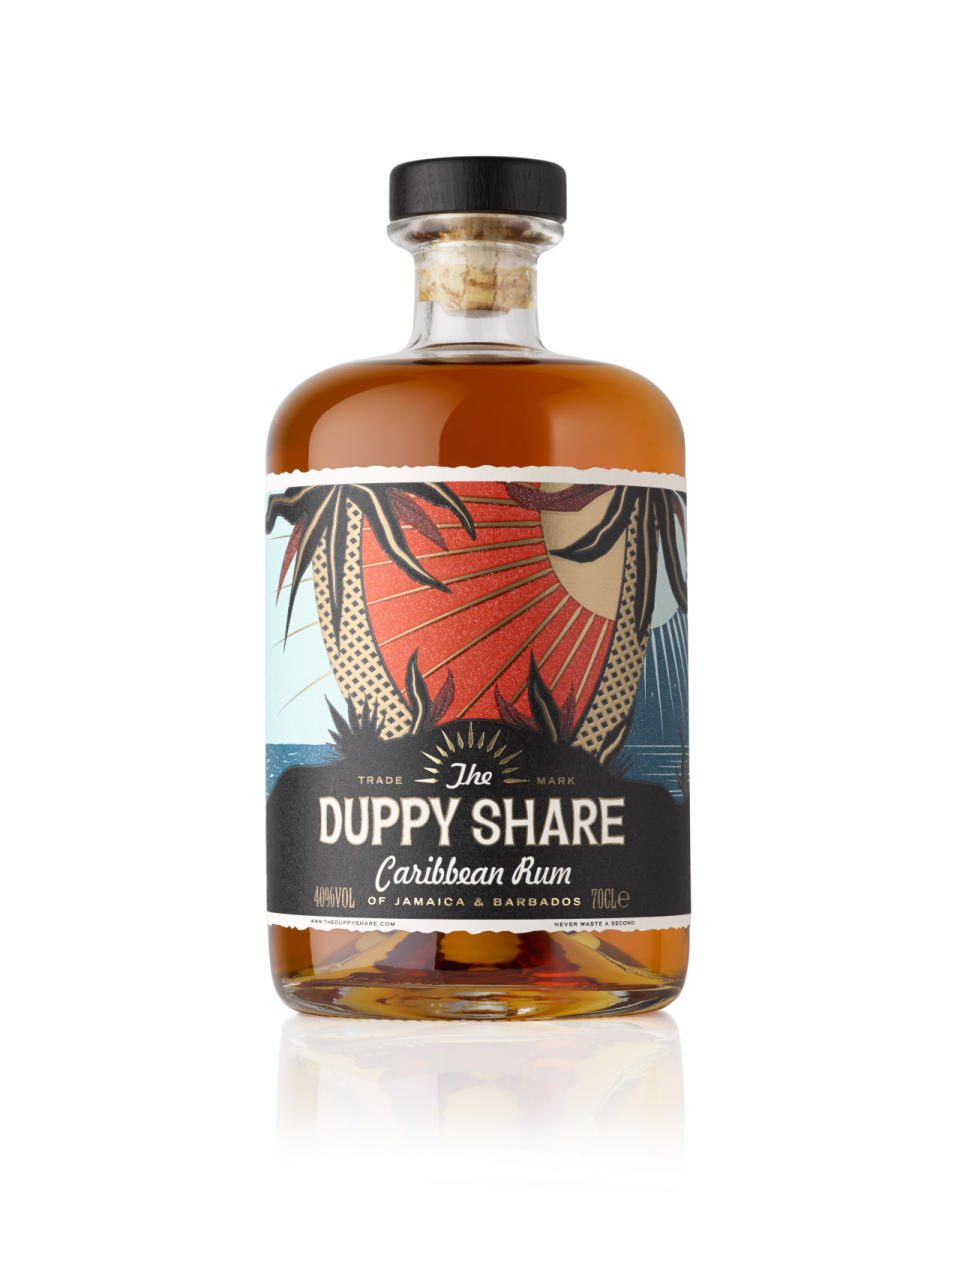 The Duppy Share Caribbean rum, £29.95